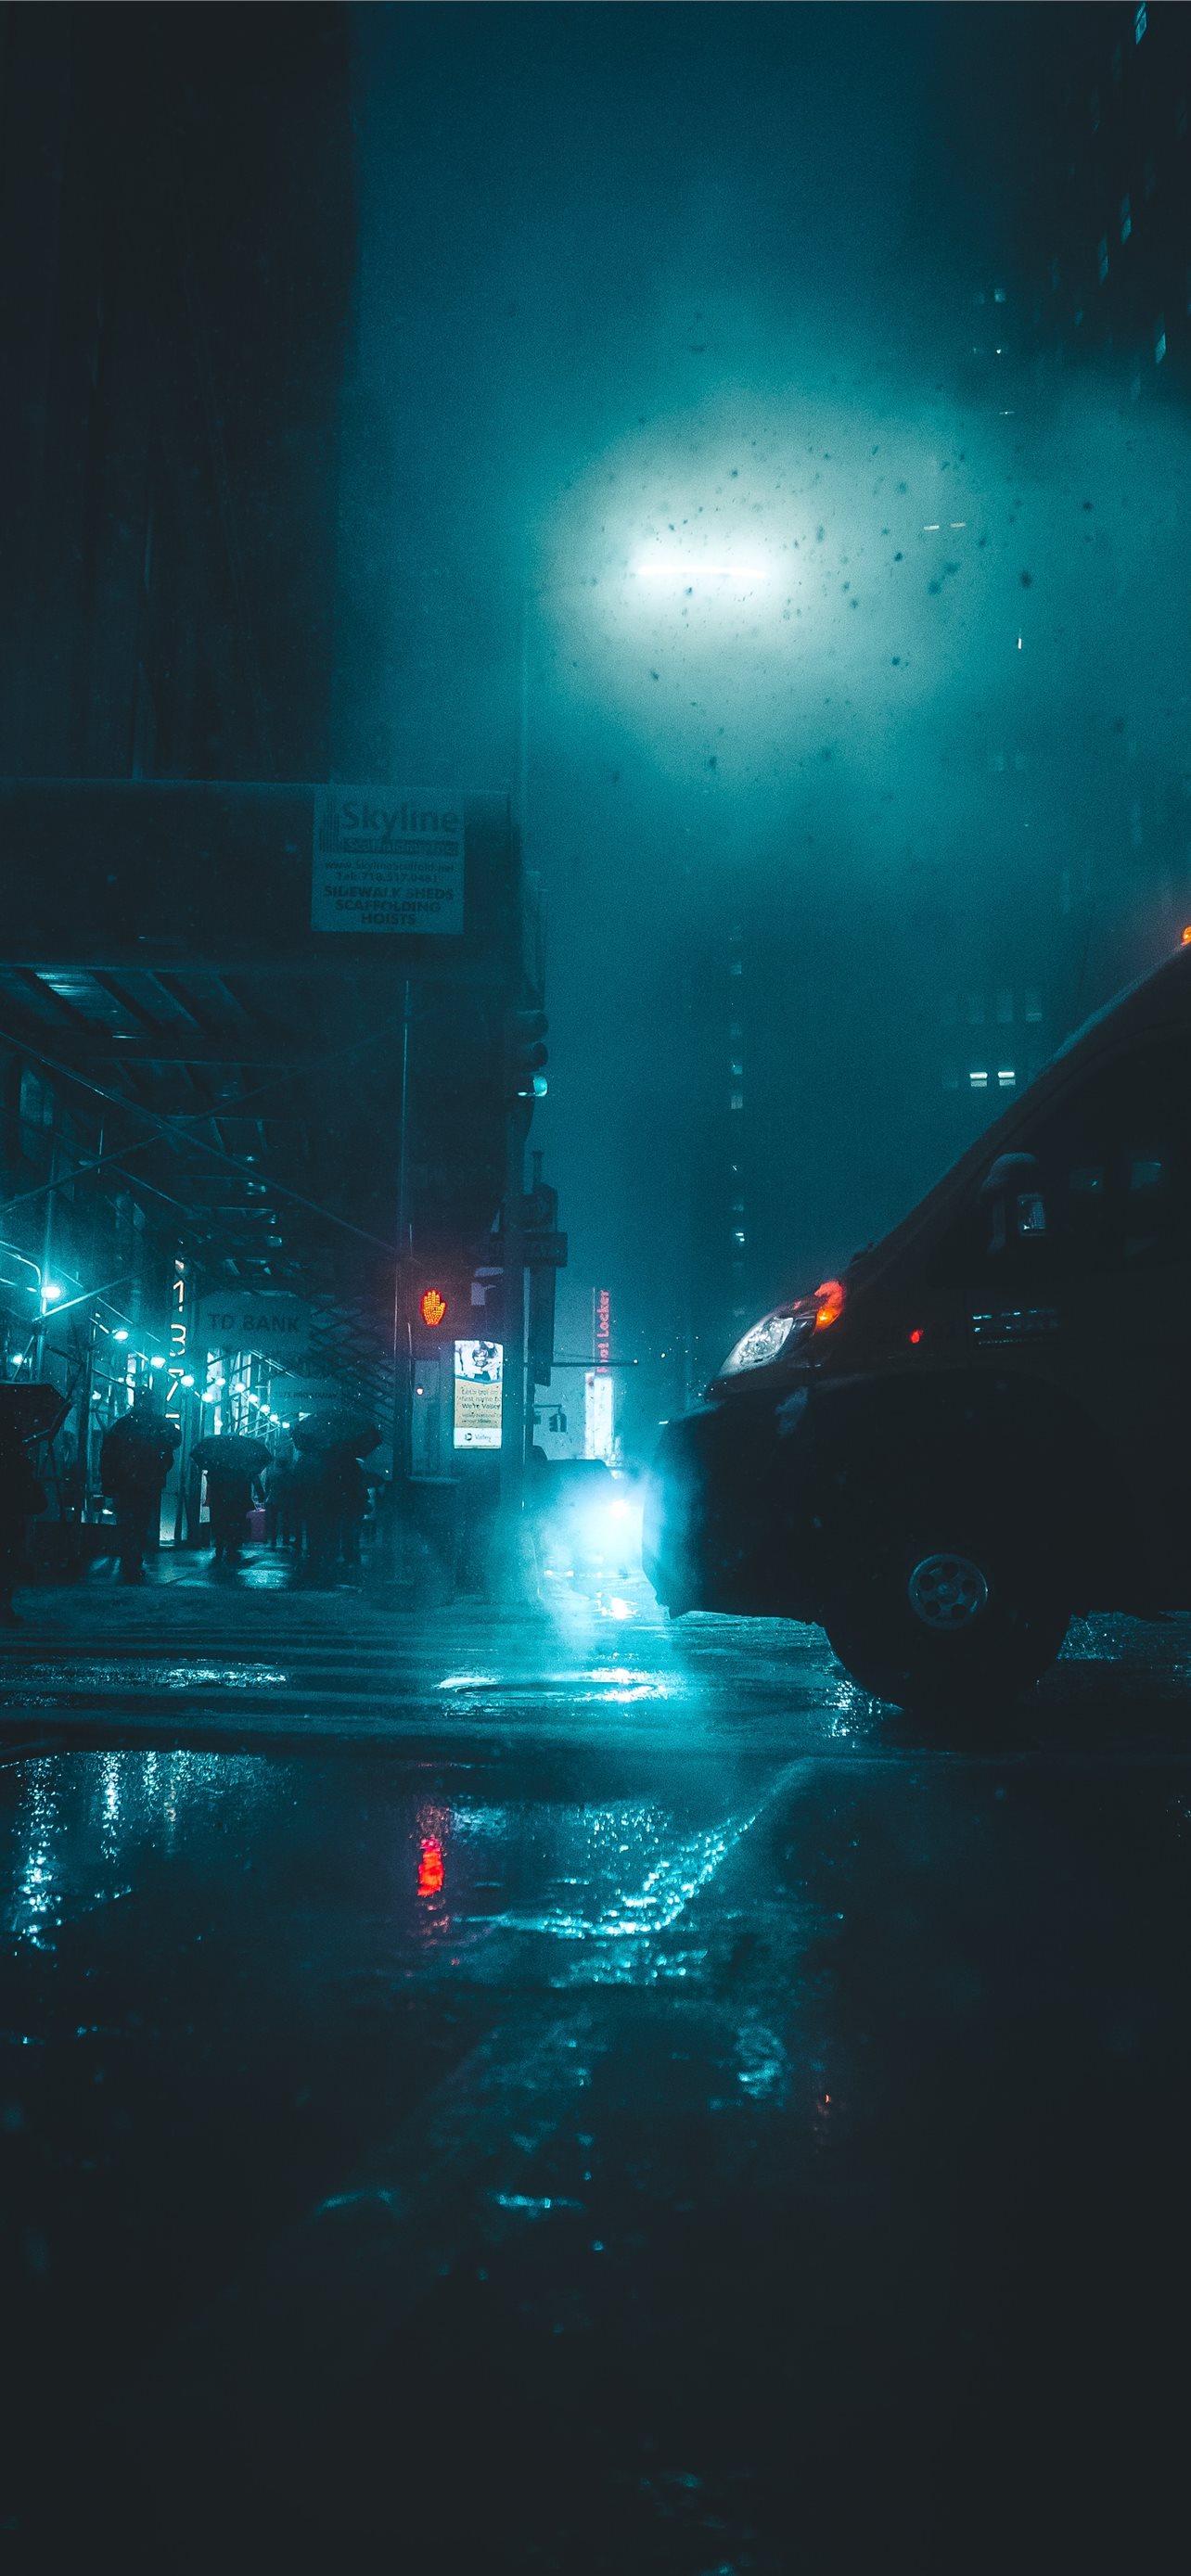 vehicle passing by wet road during nighttime iPhone wallpaper 